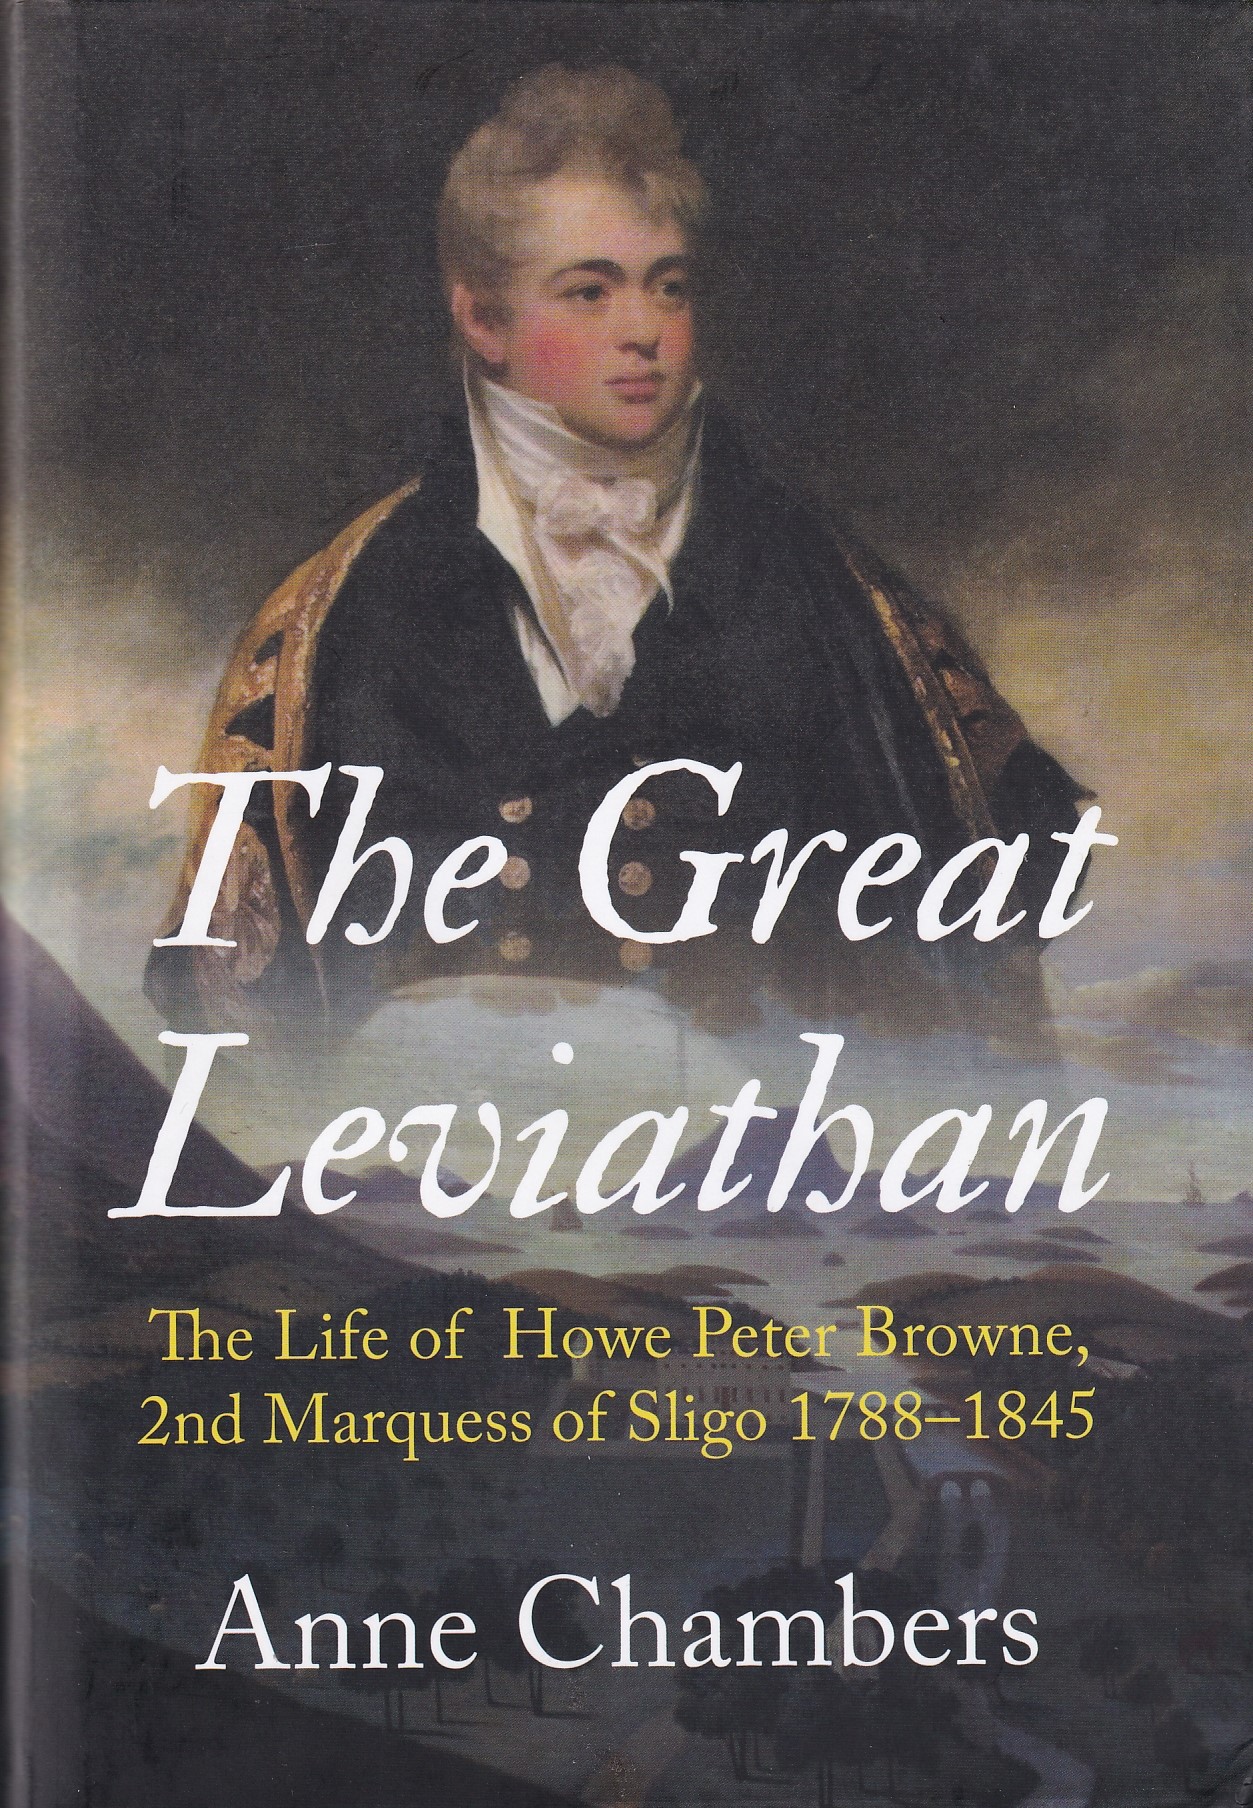 The Great Leviathan: The Life of Howe Peter Browne, Marquess of Sligo 1788-1845 | Anne Chambers | Charlie Byrne's